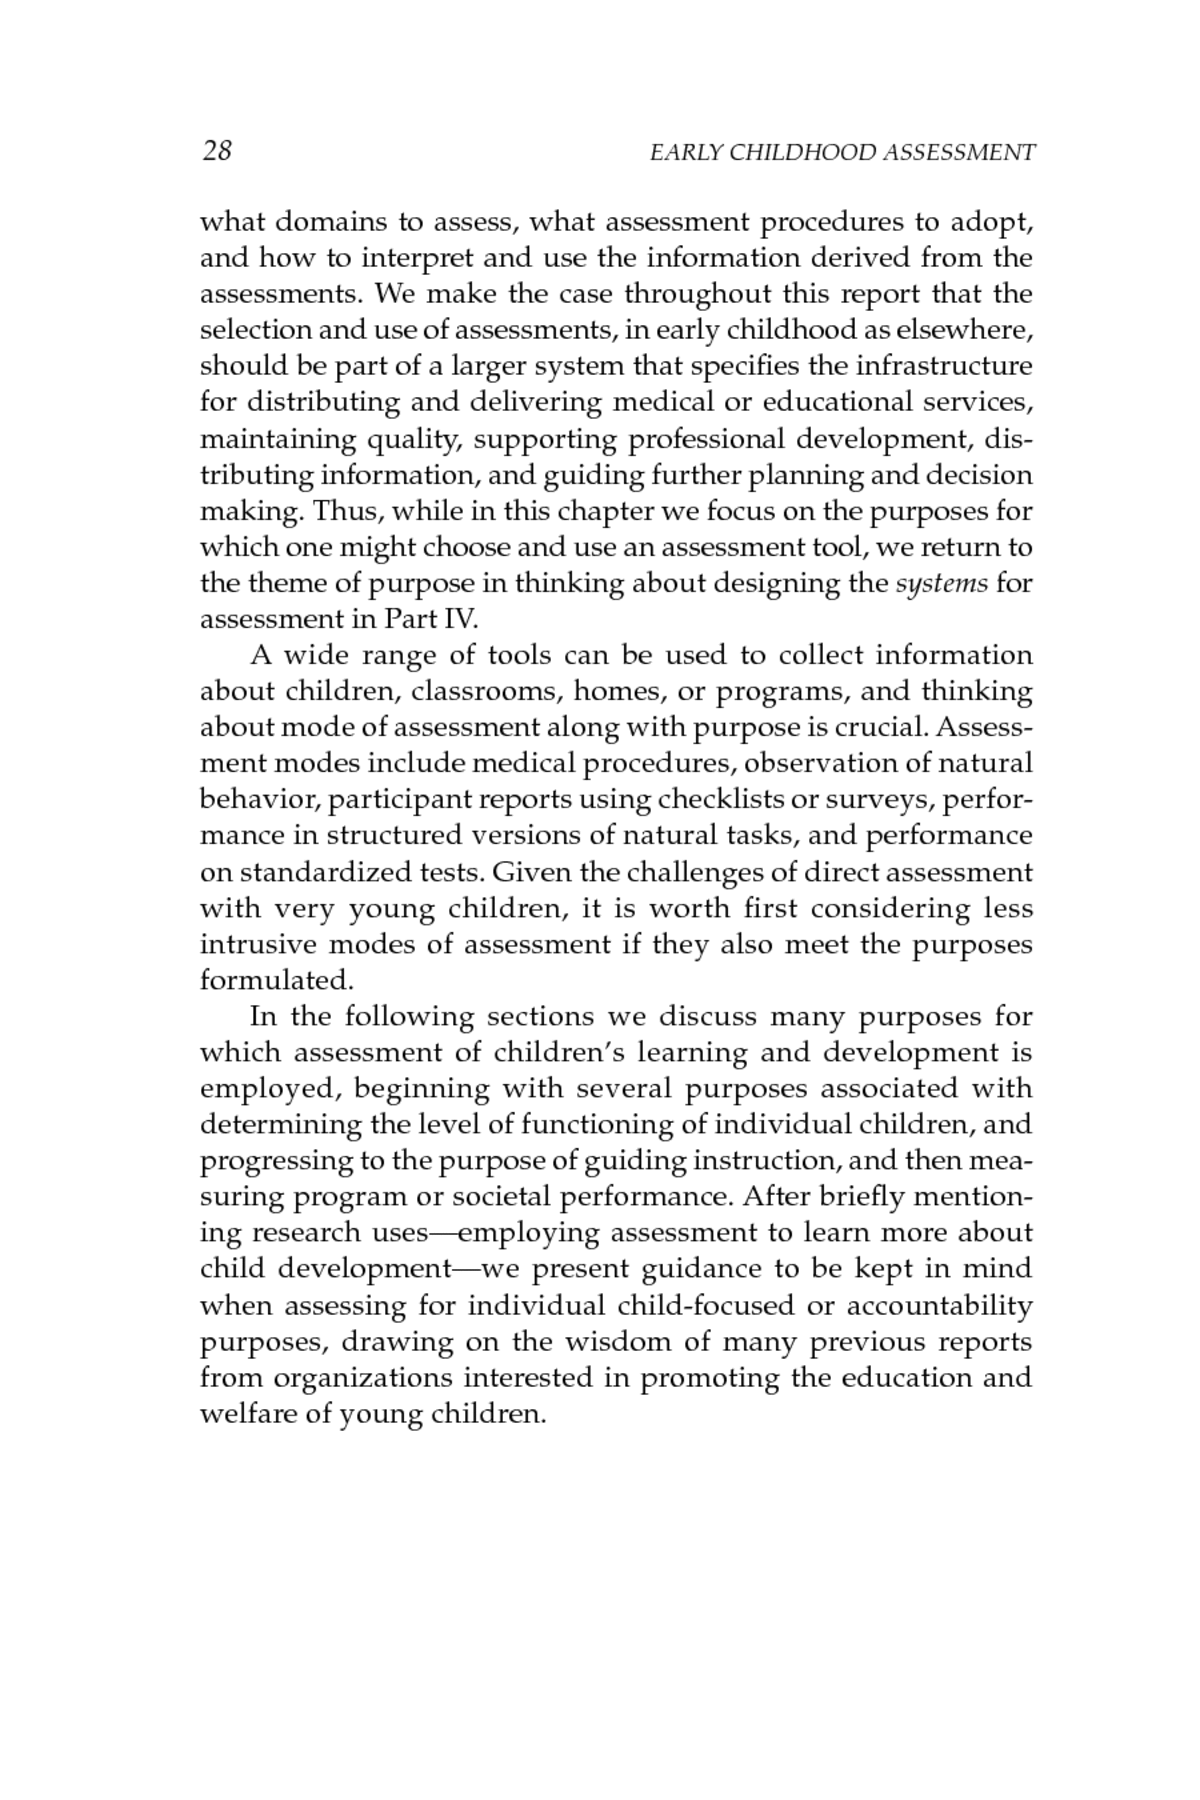 Essay about importance of early childhood education